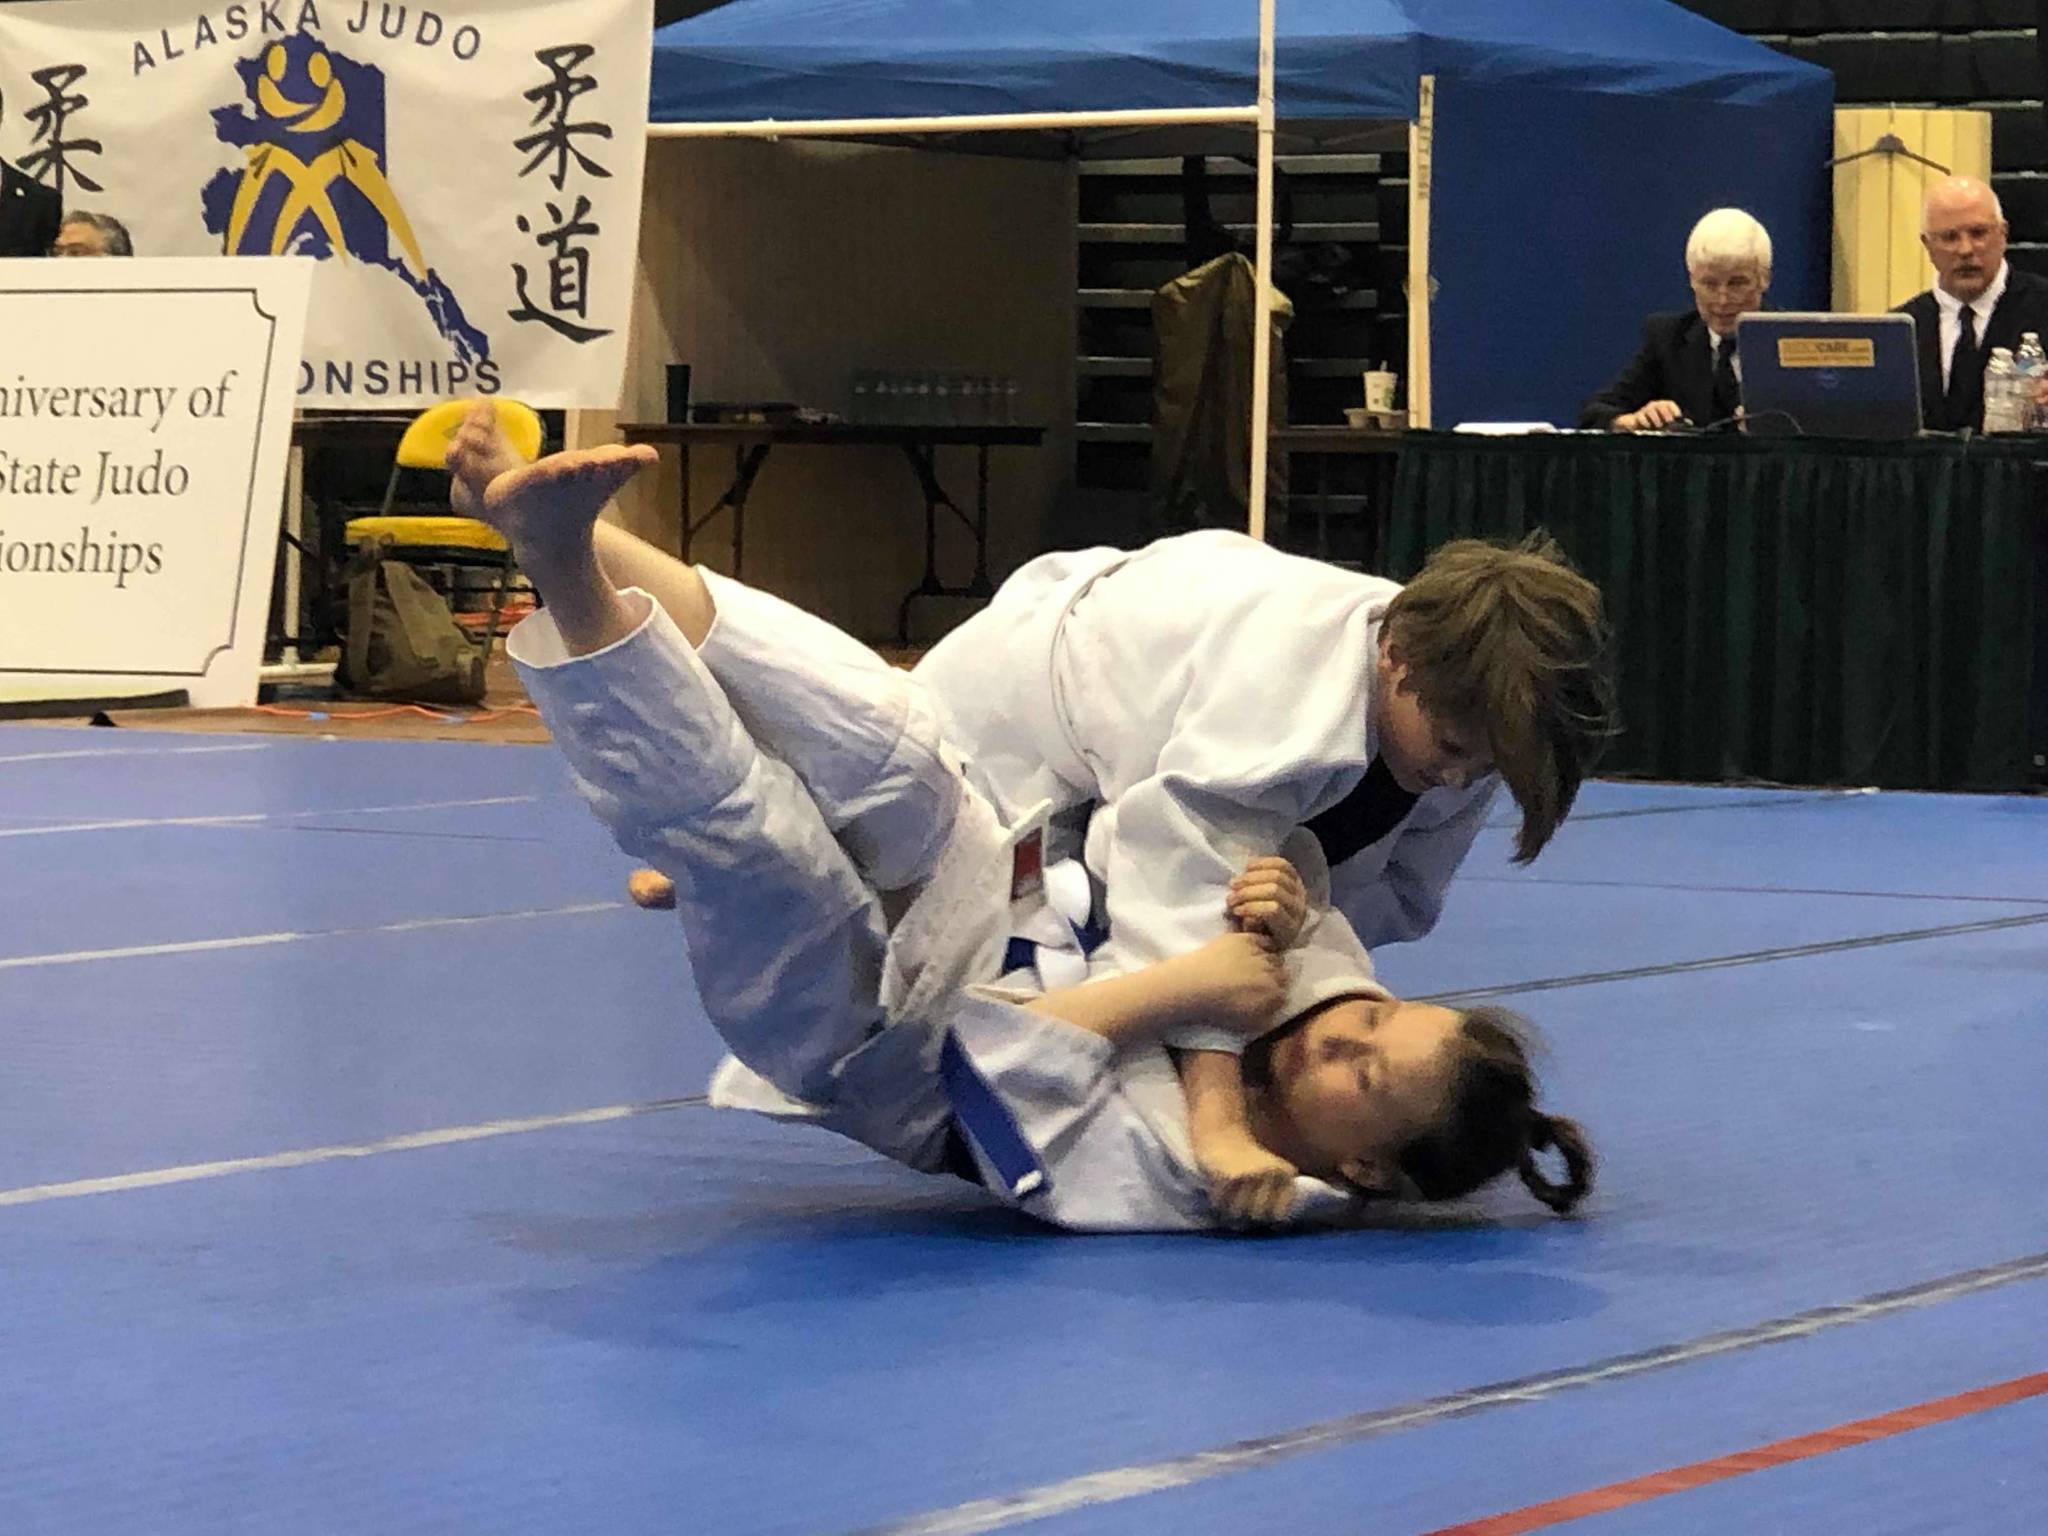 Capital City Judo’s Kaiden Odenheimer throws for Ippon (perfect score) at the Alaska State Judo Championships on Saturday, May 4, 2019. (Courtesy Photo | Jay Watts)